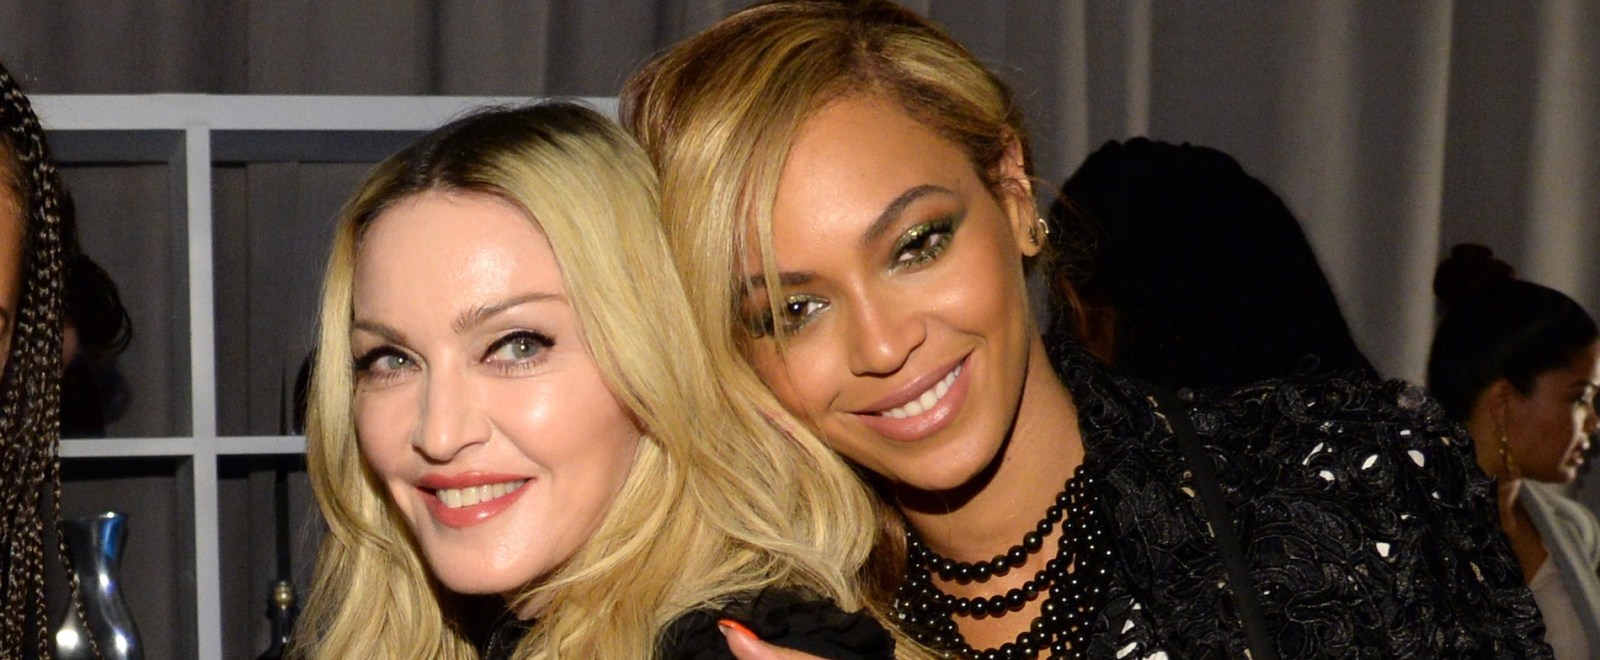 Madonna Beyonce Tidal launch event 2015